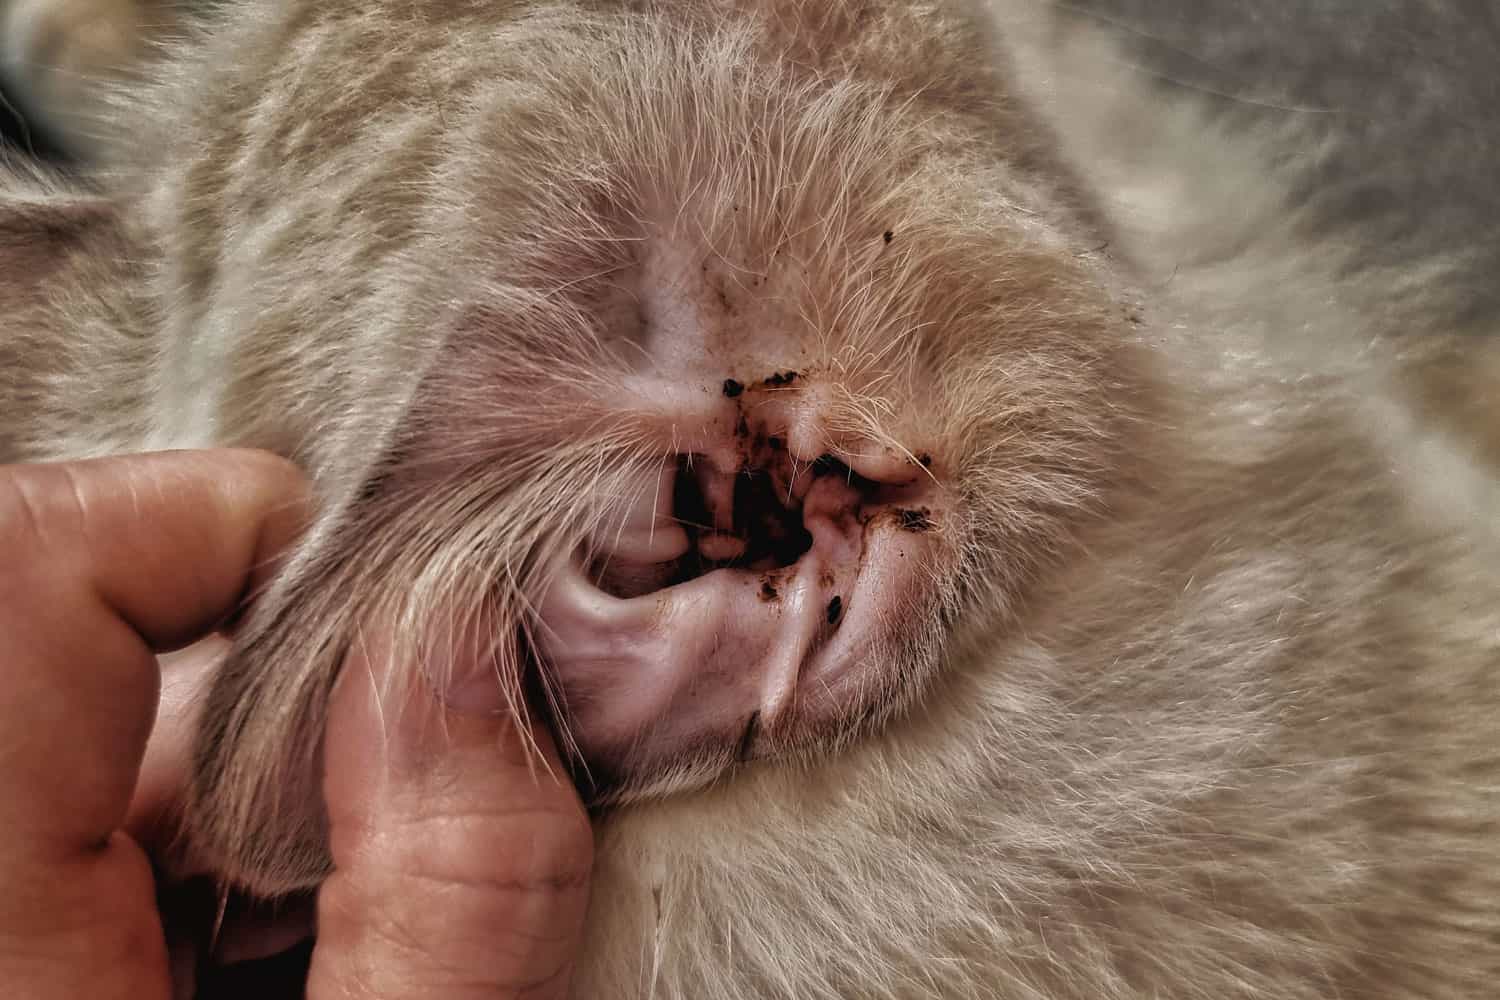 A stray cat with infectious ear discharge
